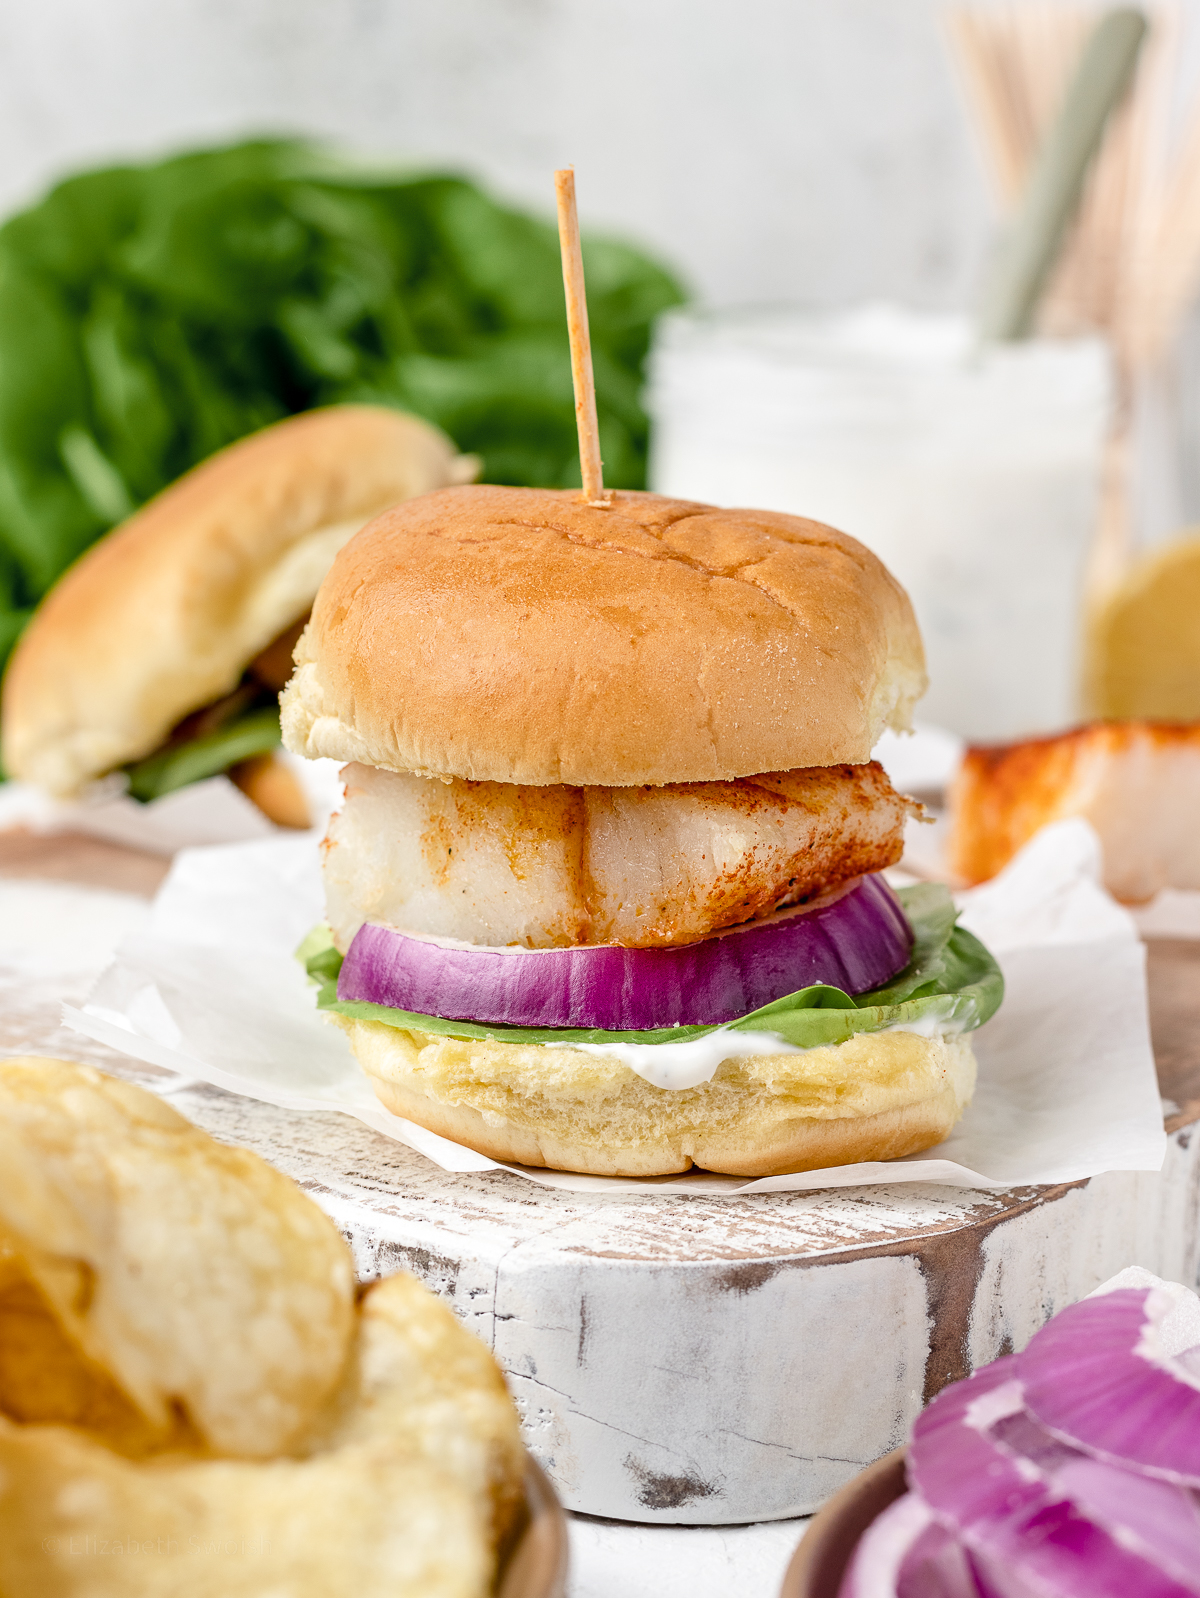 Baked Cod Fish Sliders piled high with lettuce, red onion, and yogurt dill sauce. Potato chips and more sauce served on the side.